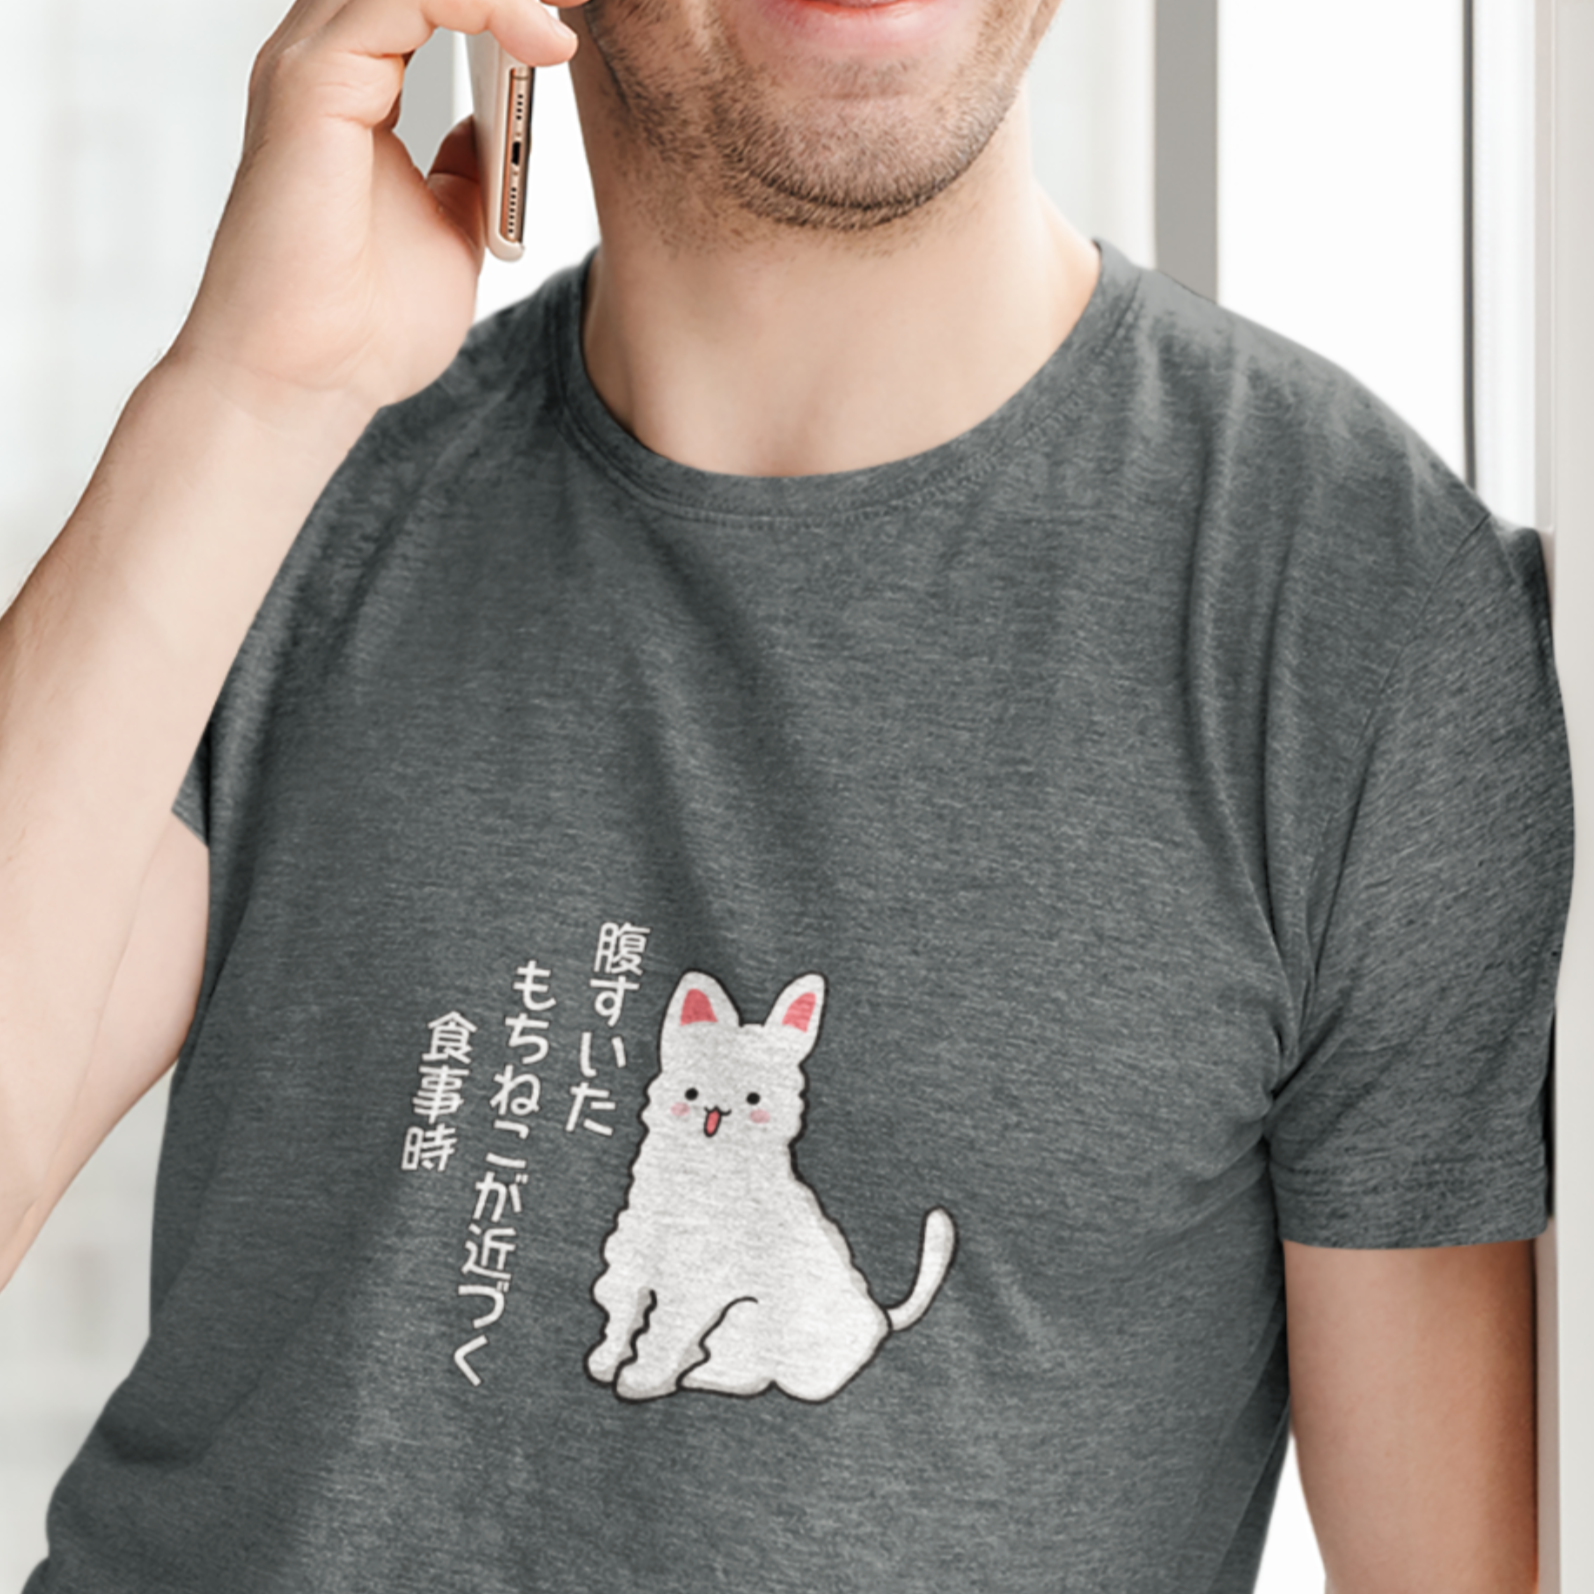 Mochi Cat T-shirt with Haiku: Hungry Cat Approaches Mealtime by Ramen Bowl - Japanese Foodie Shirt with Cute Cat Art